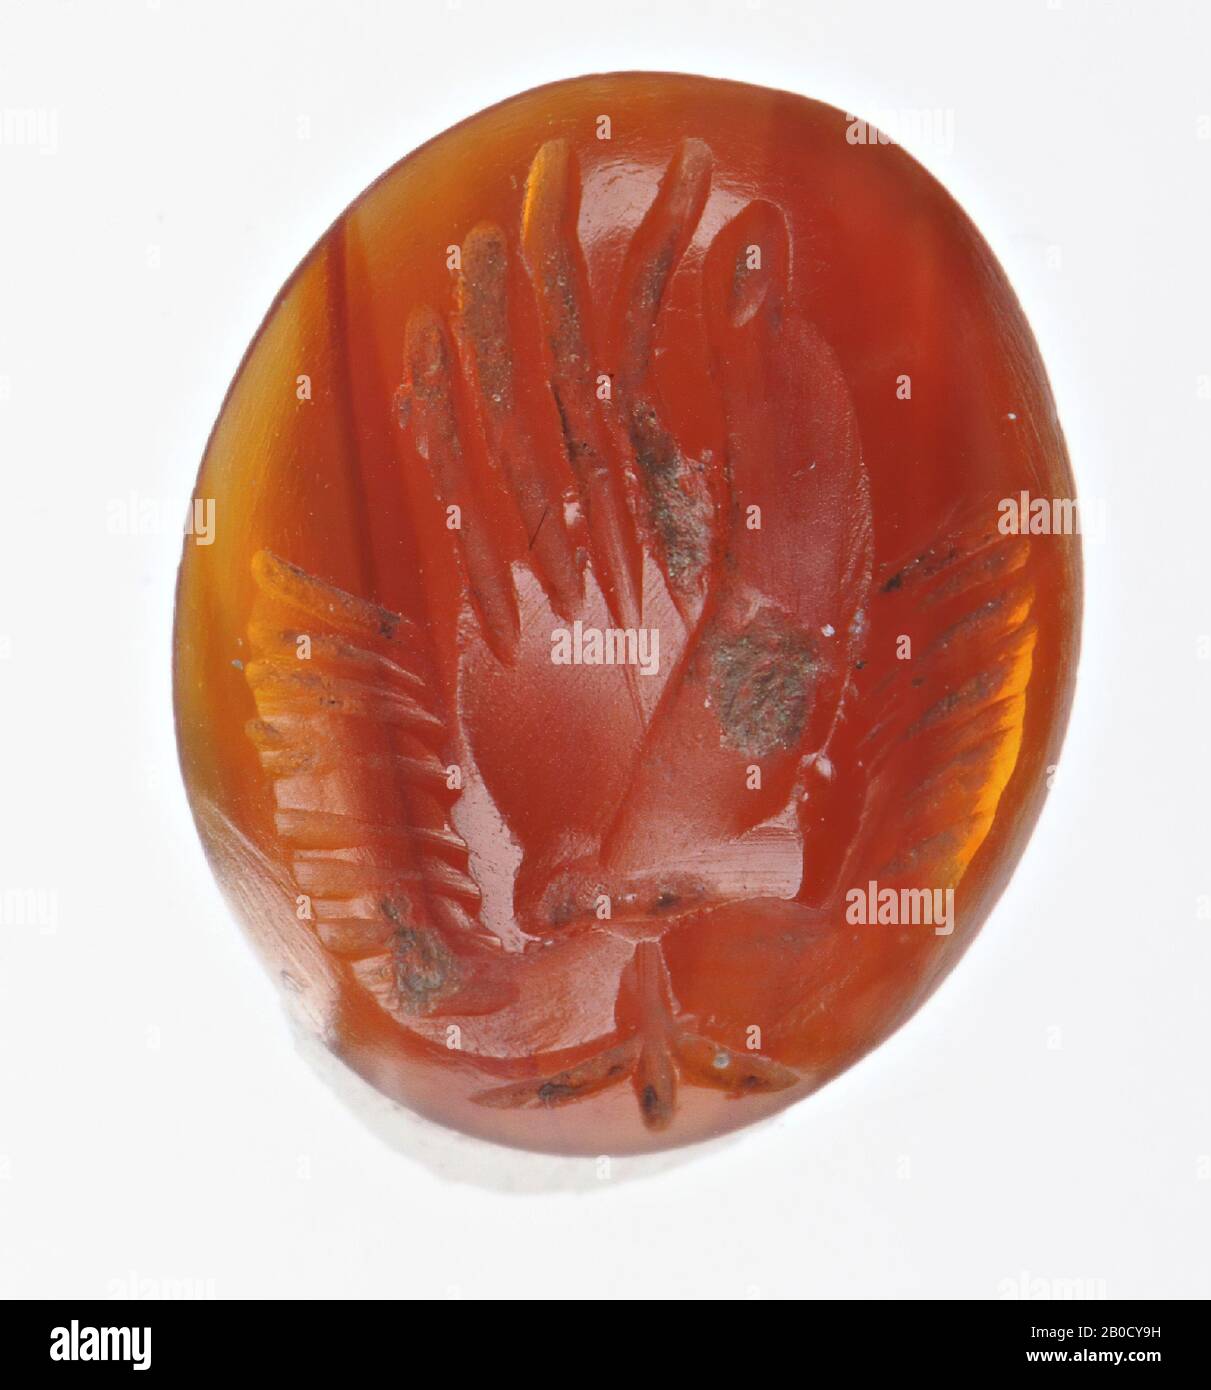 https://c8.alamy.com/comp/2B0CY9H/vz-hand-with-thumb-and-index-finger-bent-together-gem-intaglio-ringstone-carnelian-color-red-shape-oval-machining-front-convex-method-modeling-with-thick-rounded-disk-grooves-11-x-9-mm-d-3-mm-2nd-3rd-century-ad-100-300-ad-2B0CY9H.jpg